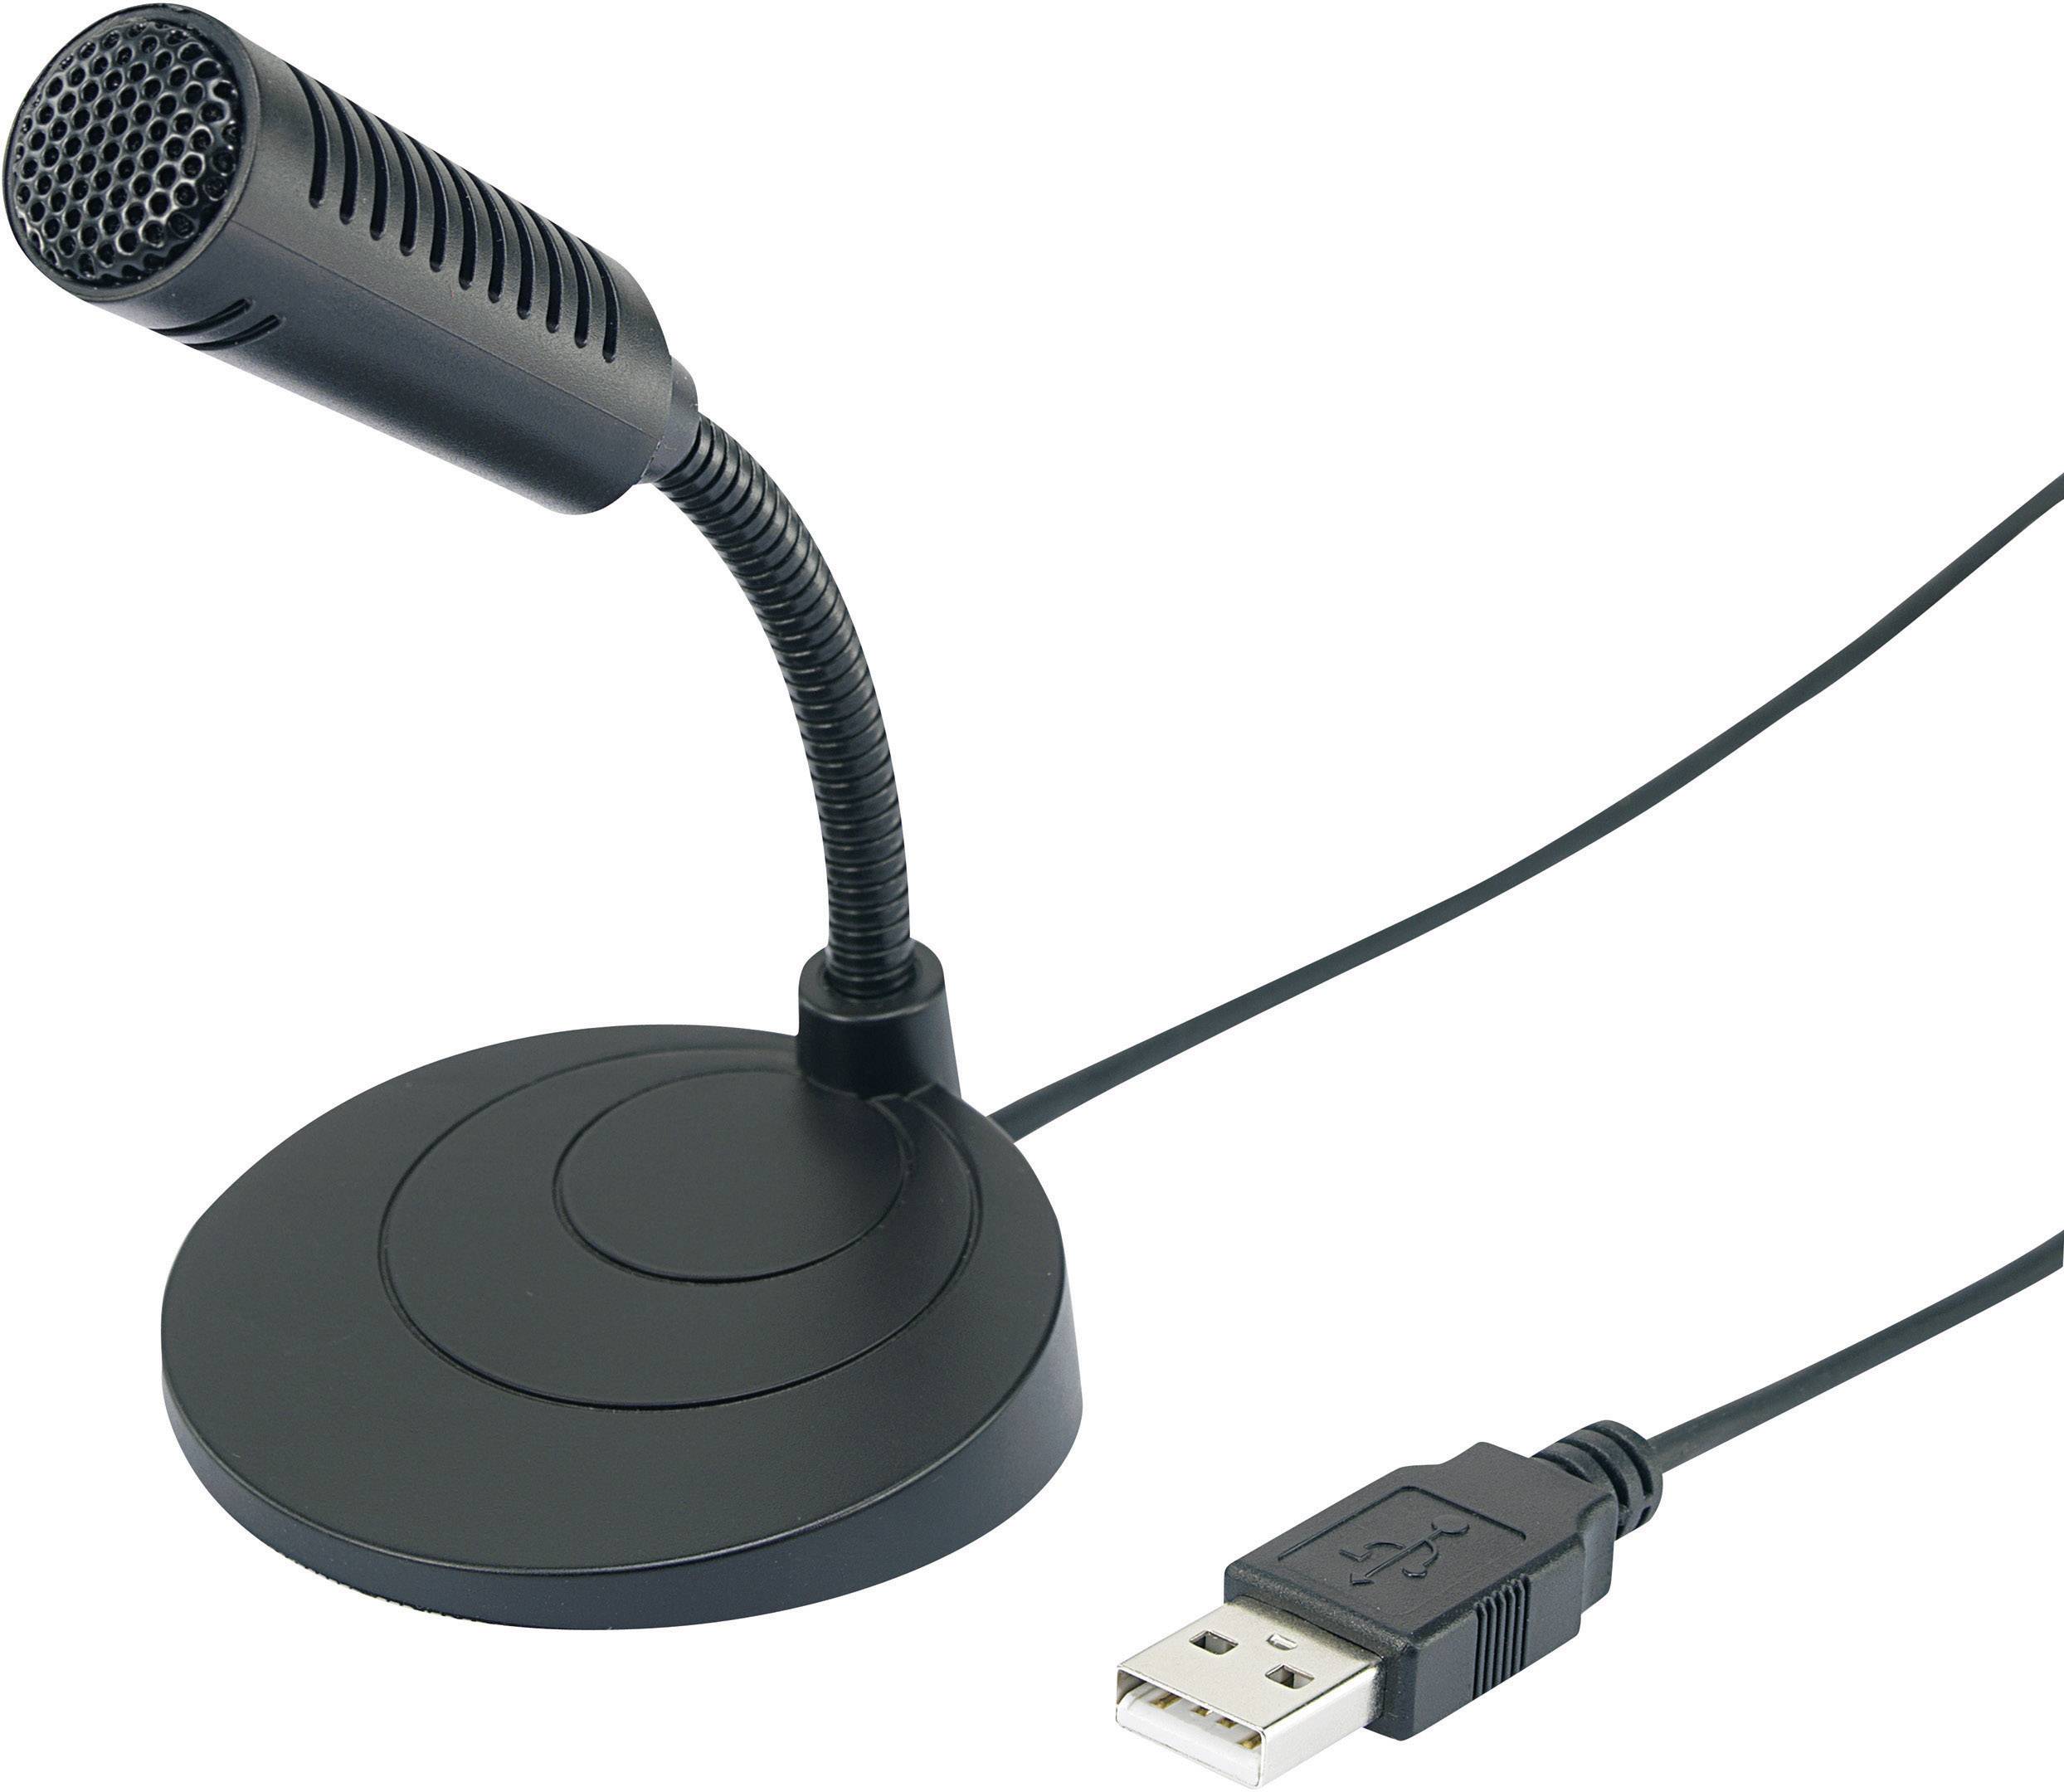 Renkforce USB microphone Corded incl. cable | Conrad.com